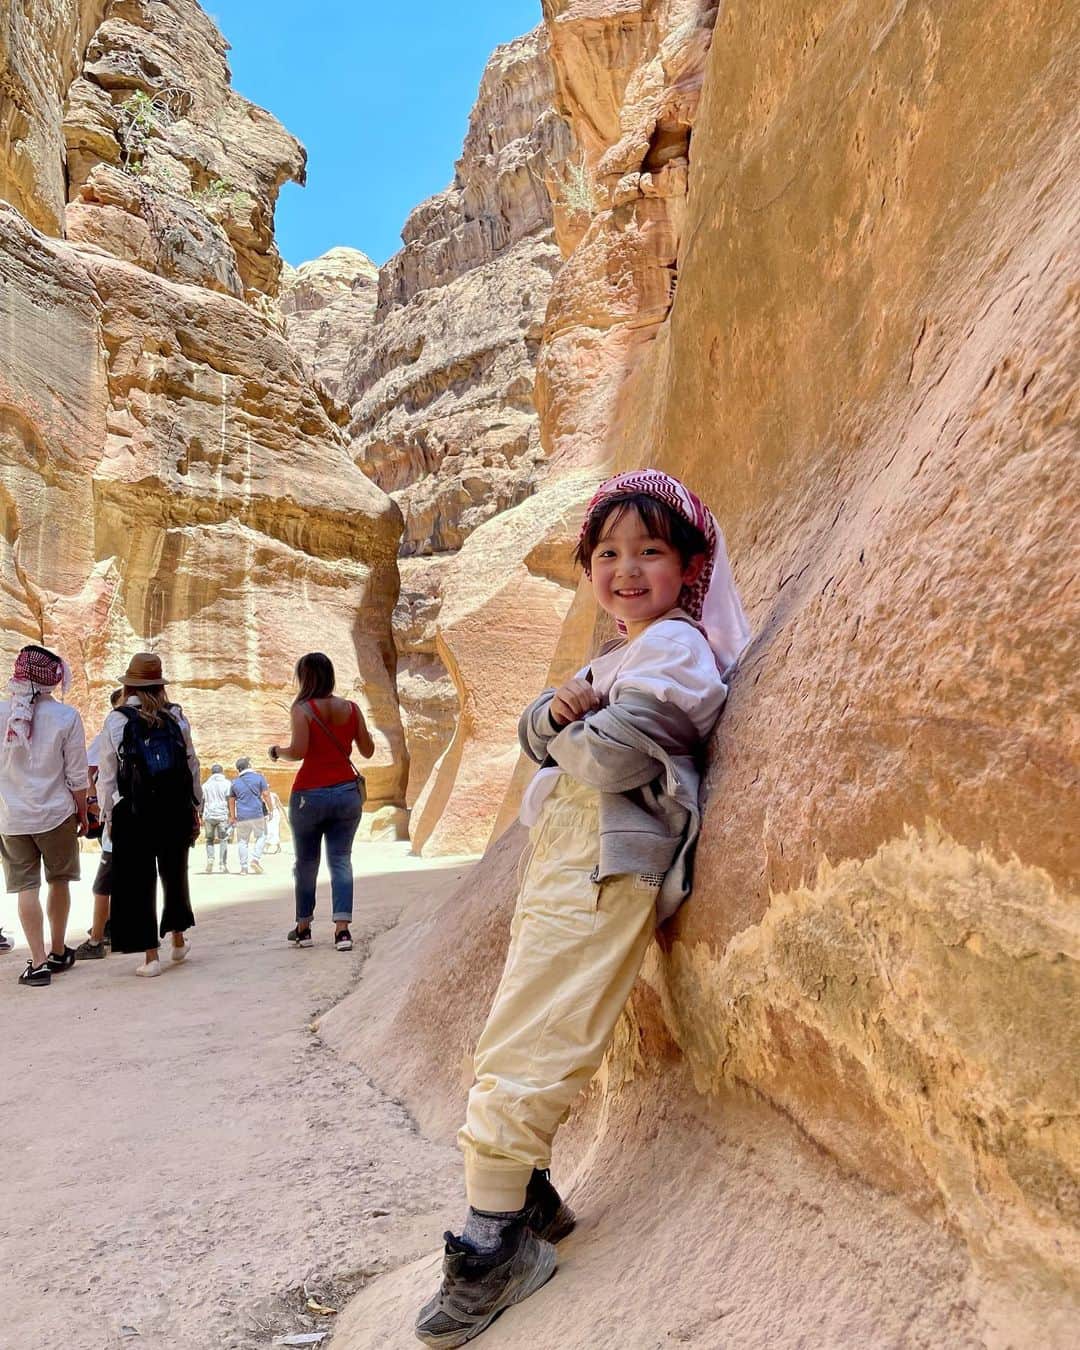 石塚錬さんのインスタグラム写真 - (石塚錬Instagram)「WORLD TOUR DAY11 〜ヨルダン🇯🇴編〜 👦💬「I'm in ペトラ❣️ 中東のヨルダンにきました🇯🇴✈️ 遺跡の神殿をみたときは思わずワッて声がでました🥺 気温は40℃以上あってさすがにラクダさんも暑そうでした🐪 ターバンを巻いて色んな人と写真を撮りました🤳👳(これも帽子のお土産です🧢)」 . （👨パパ通信📨）ドイツ経由で7時間、ヨルダンに到着しました✈️🇯🇴。ペトラはインディジョーンズの舞台になった遺跡で、岩壁を削って大都市を作ったそうです(世界遺産)。レンはターバン効果か沢山の人に声をかけられていました🤳特にほっぺたが大人気でした笑 . 👦💬 「I'm in Petra❣️ I'm in Jordan in the Middle East🇯🇴✈️ I couldn't help but gasp when I saw the temple🥺. The temperature was over 40 degrees Celsius and even the camels looked hot🐪. I took pictures with many people wearing turbans🤳👳(This is also a souvenir of my hat. It's also a souvenir of the hat 🧢)」 . (👨Papa News 📨) It is the site where Indiana Jones was set (World Heritage Site)🇯🇴. They built a big city by carving out a rock wall. It took about 7 hours to get to Jordan via Germany. Ren was approached by many people, probably due to the turban effect🤳. His cheeks were especially popular lol. . #男旅 #世界一周 #旅 #ヨルダン  #旅行 #ペトラ遺跡 #砂漠 #中東 #ラクダ #ターバン #インディジョーンズ #世界遺産 #Mantrip #aroundtheworldtrip #trip #middleeast #Jordan #petra #camel #worldhelitage #여행 #남자여행 #การเดินทาง #ทริปผู้ชาย #Perjalanan #石塚錬 #成長日記 #ishizukaren #renishizuka #이시즈카렌」8月15日 18時59分 - ishizuka_ren